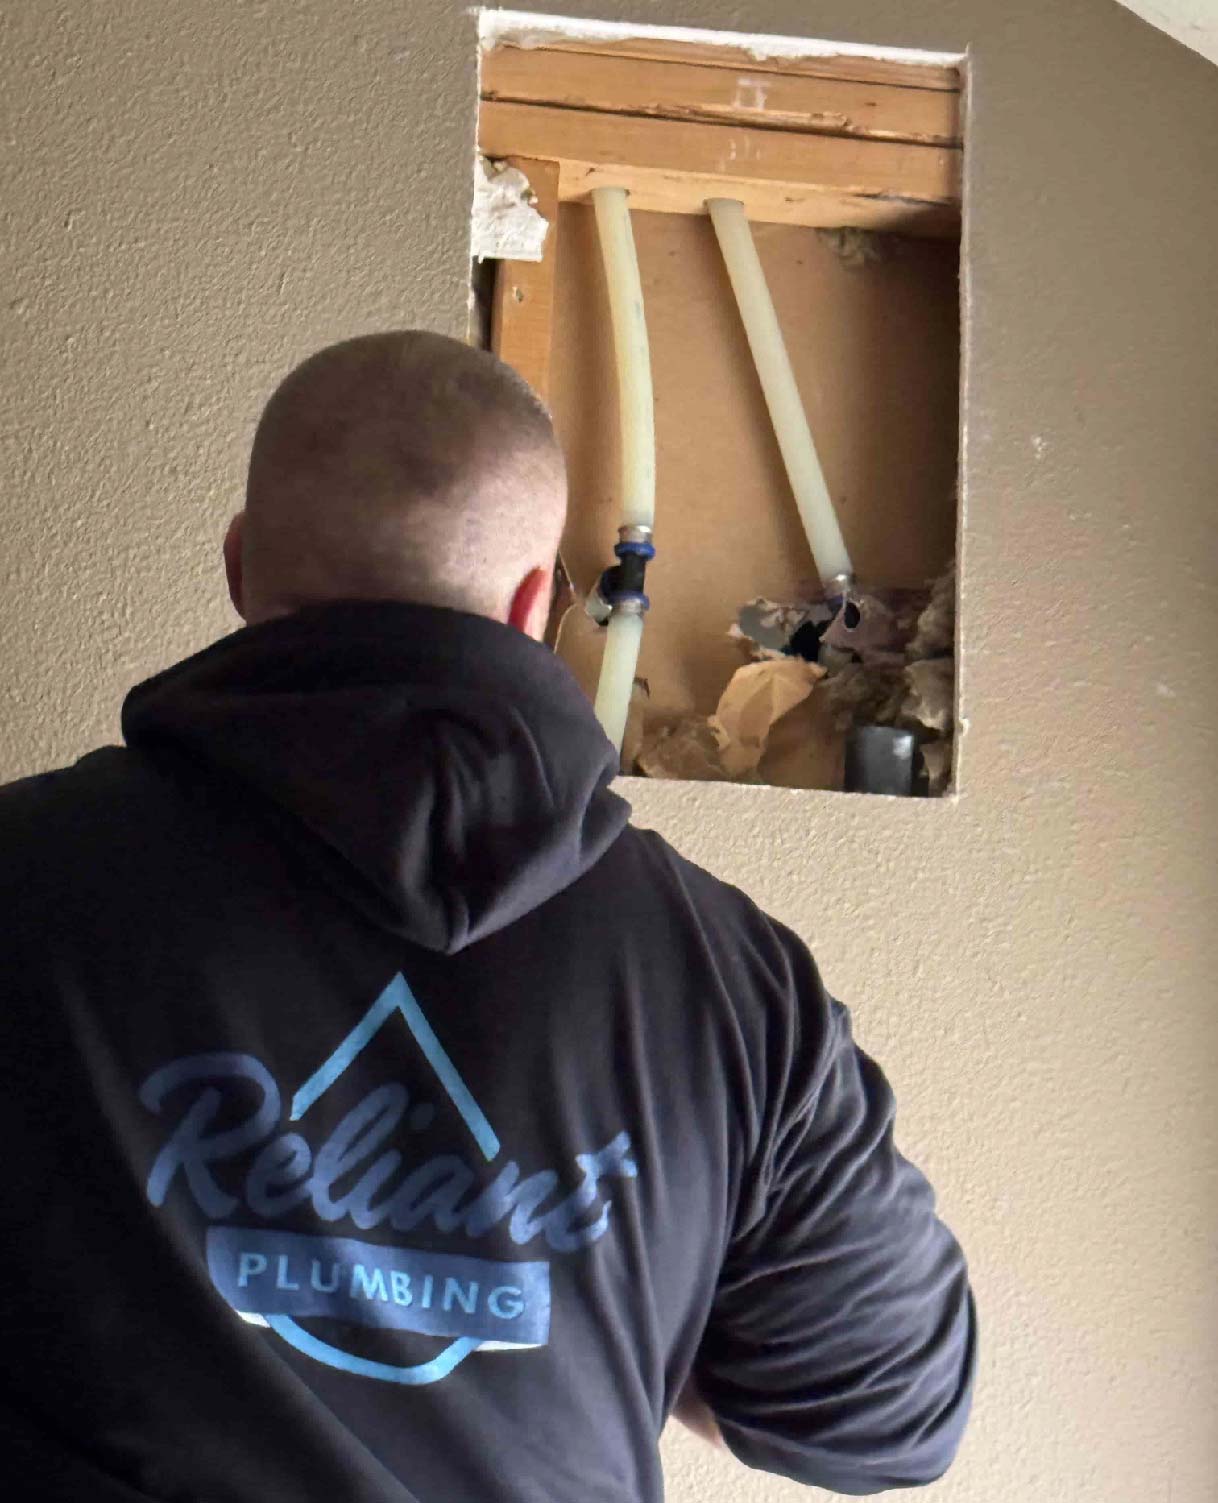 Reliant plumbing ceo max hicks repairing a home that flooded. a whole house repipe was necessary to repair the home.